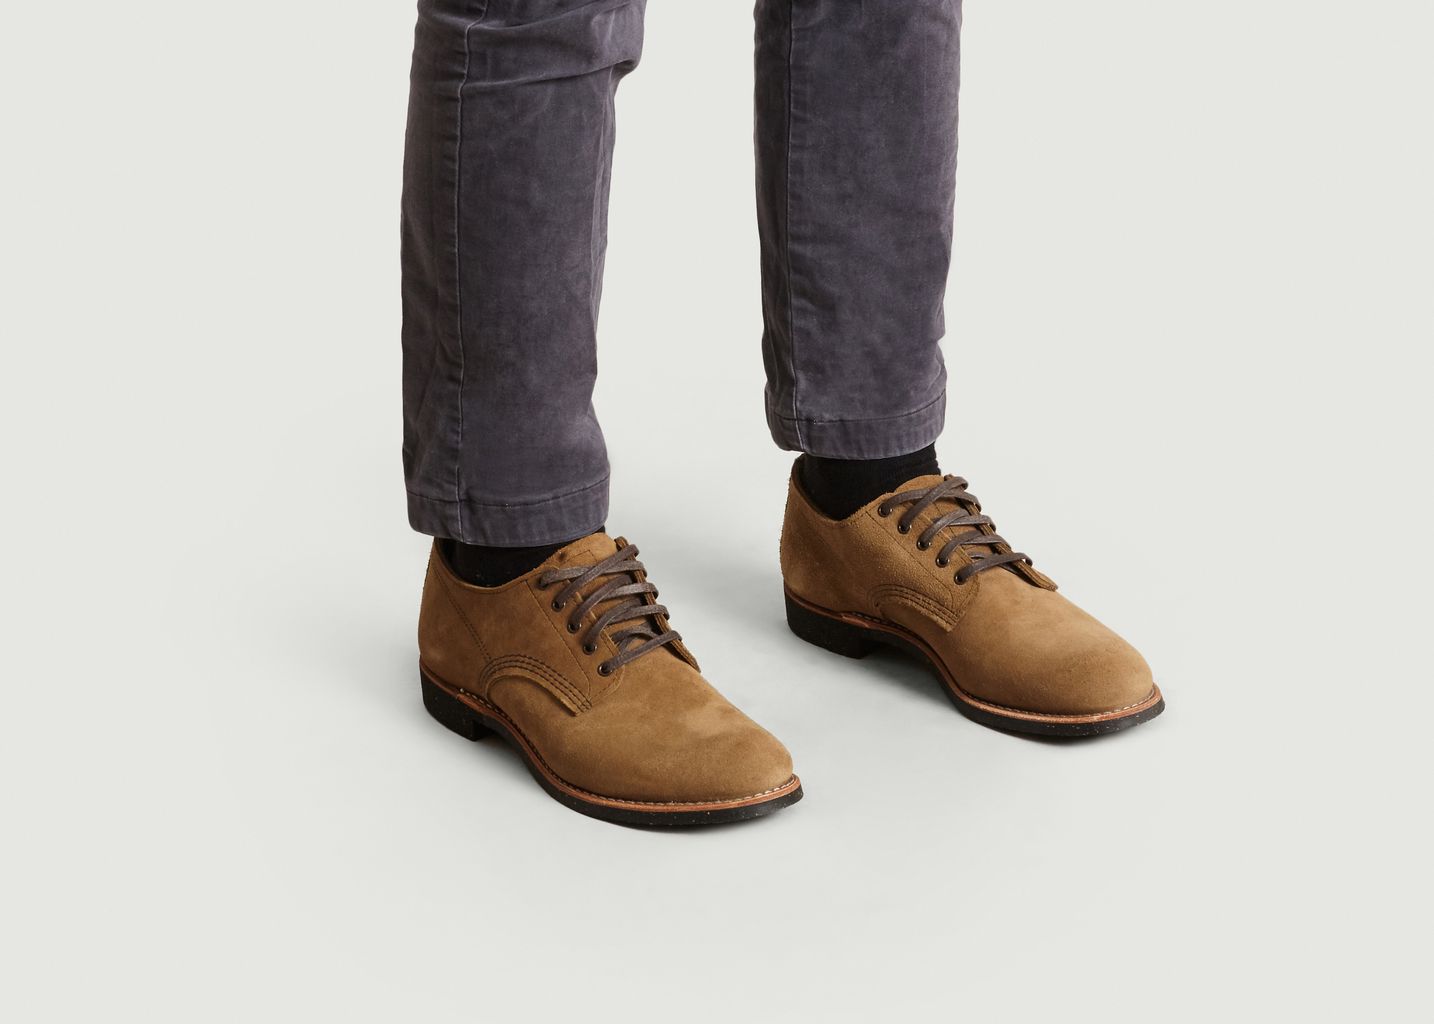 Merchant Oxford 8043 - Red Wing Shoes